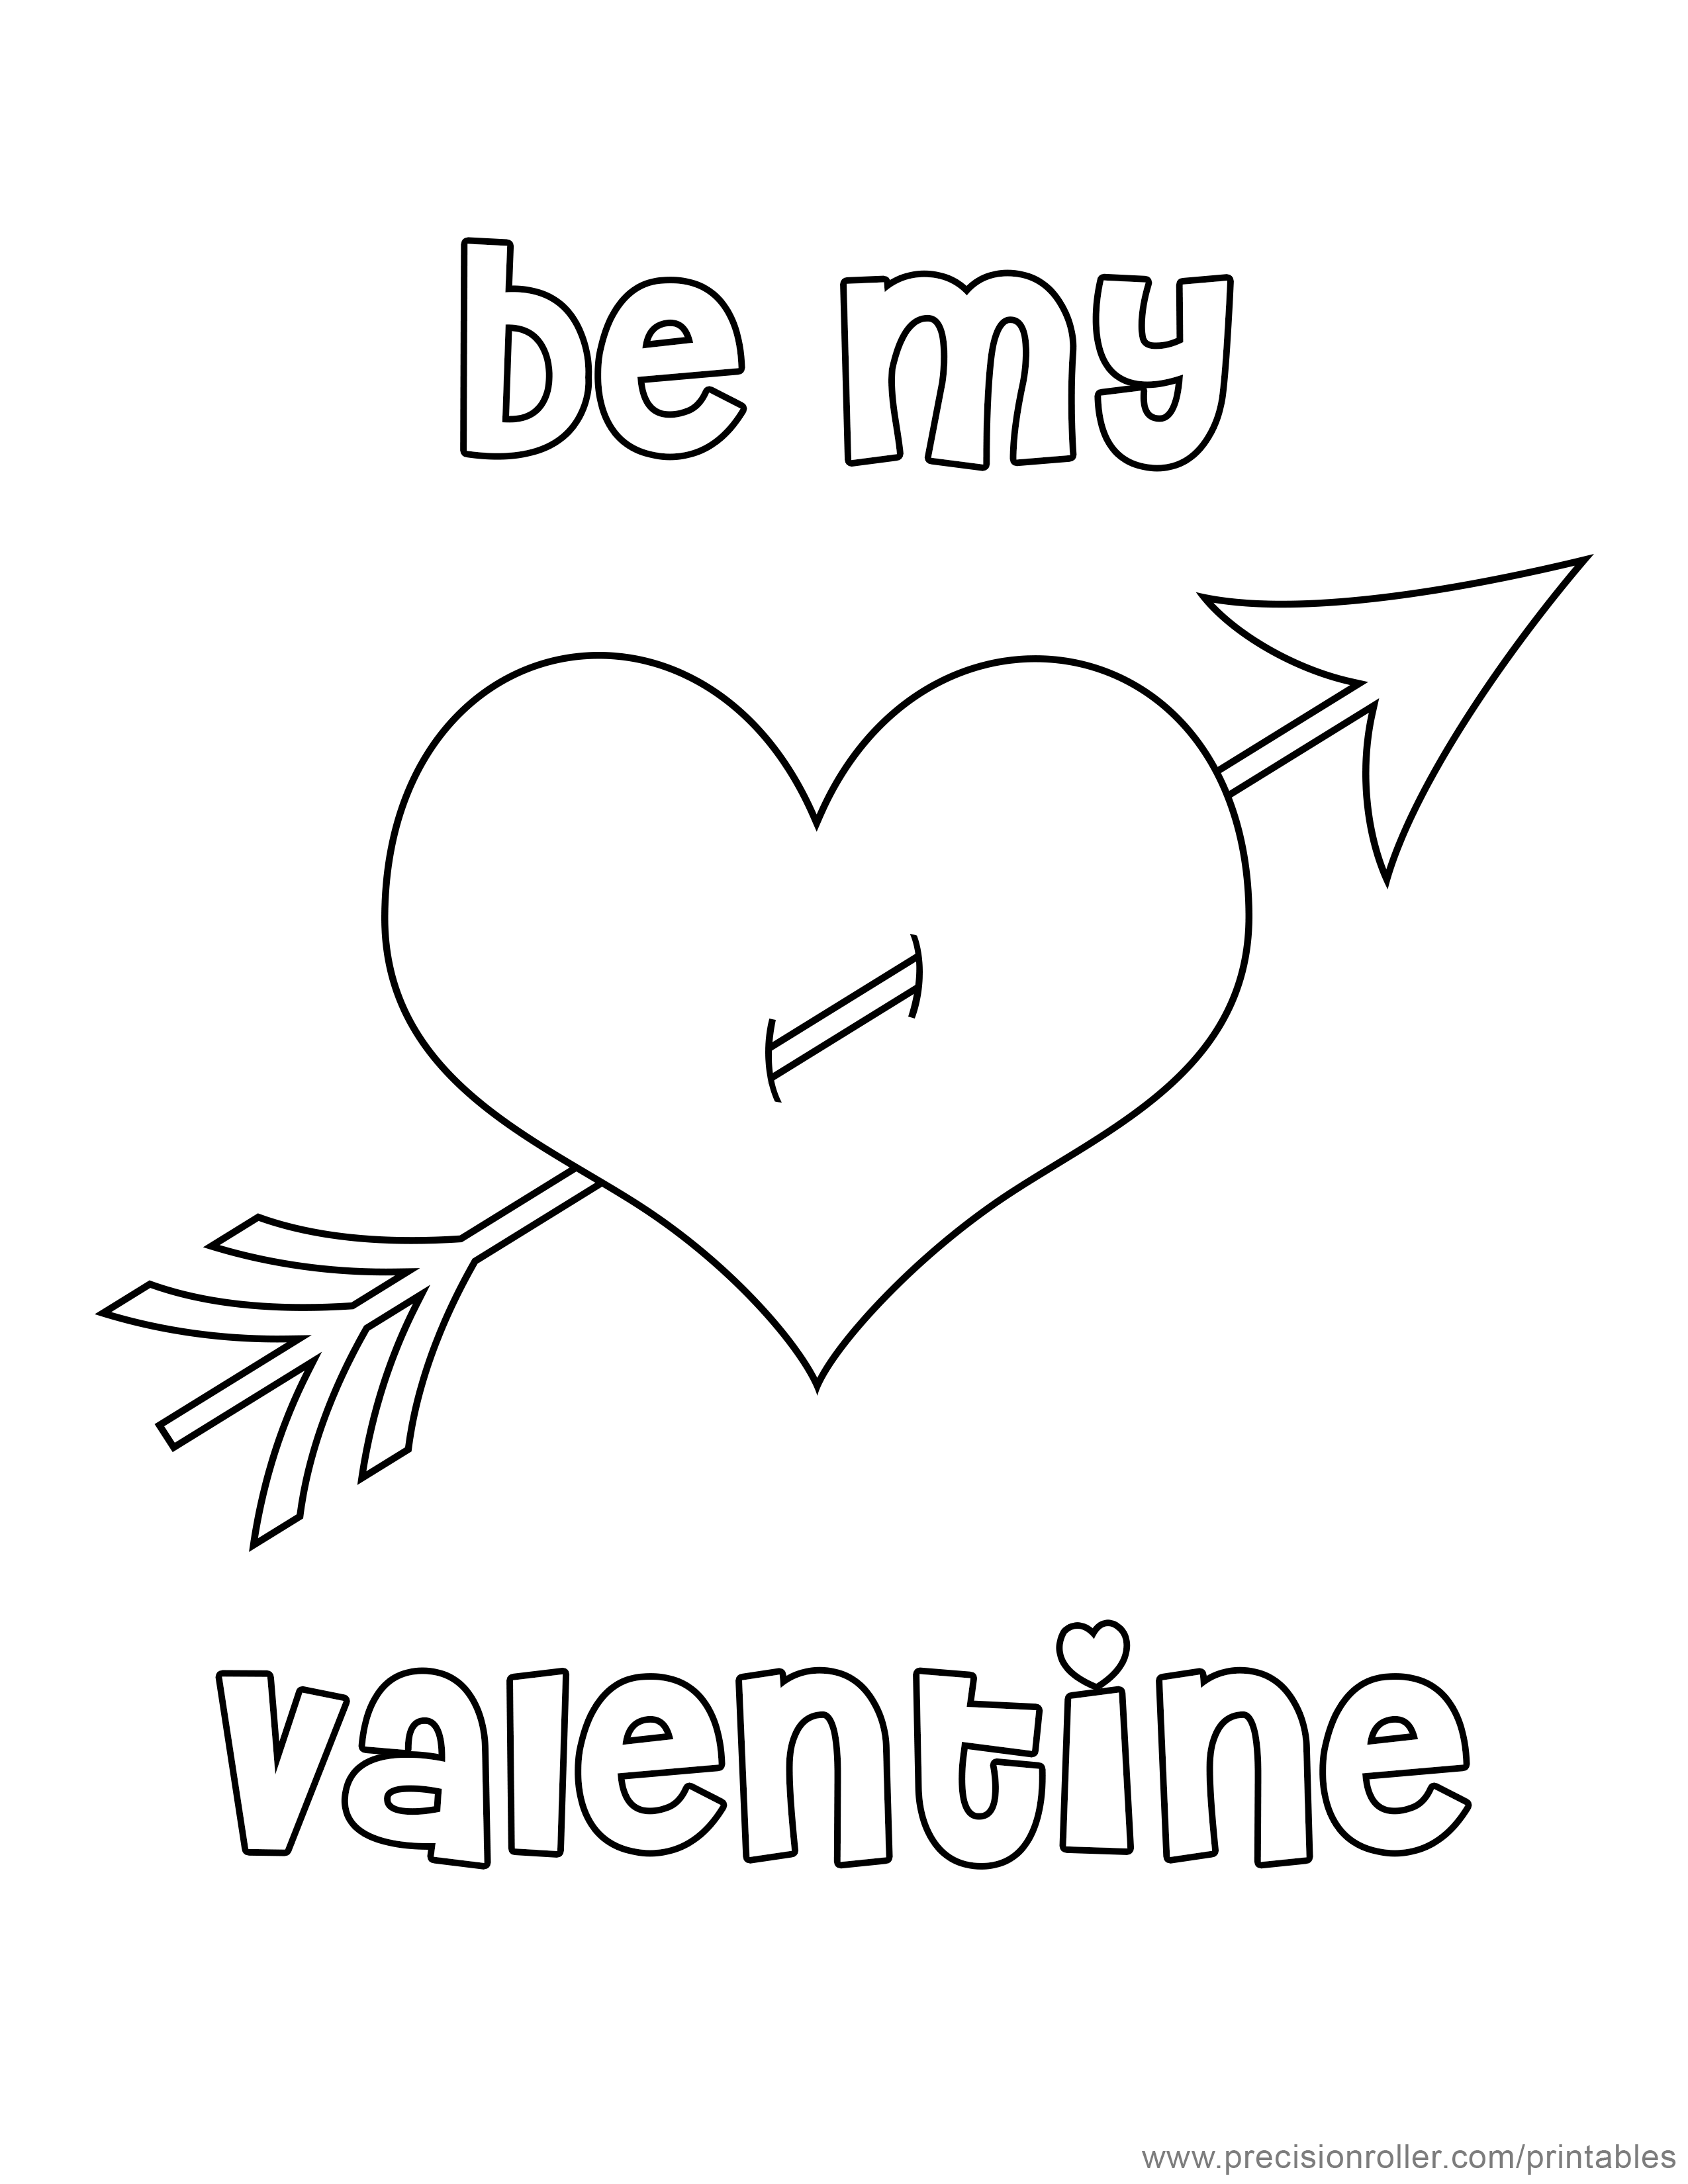 Valentines day heart coloring page